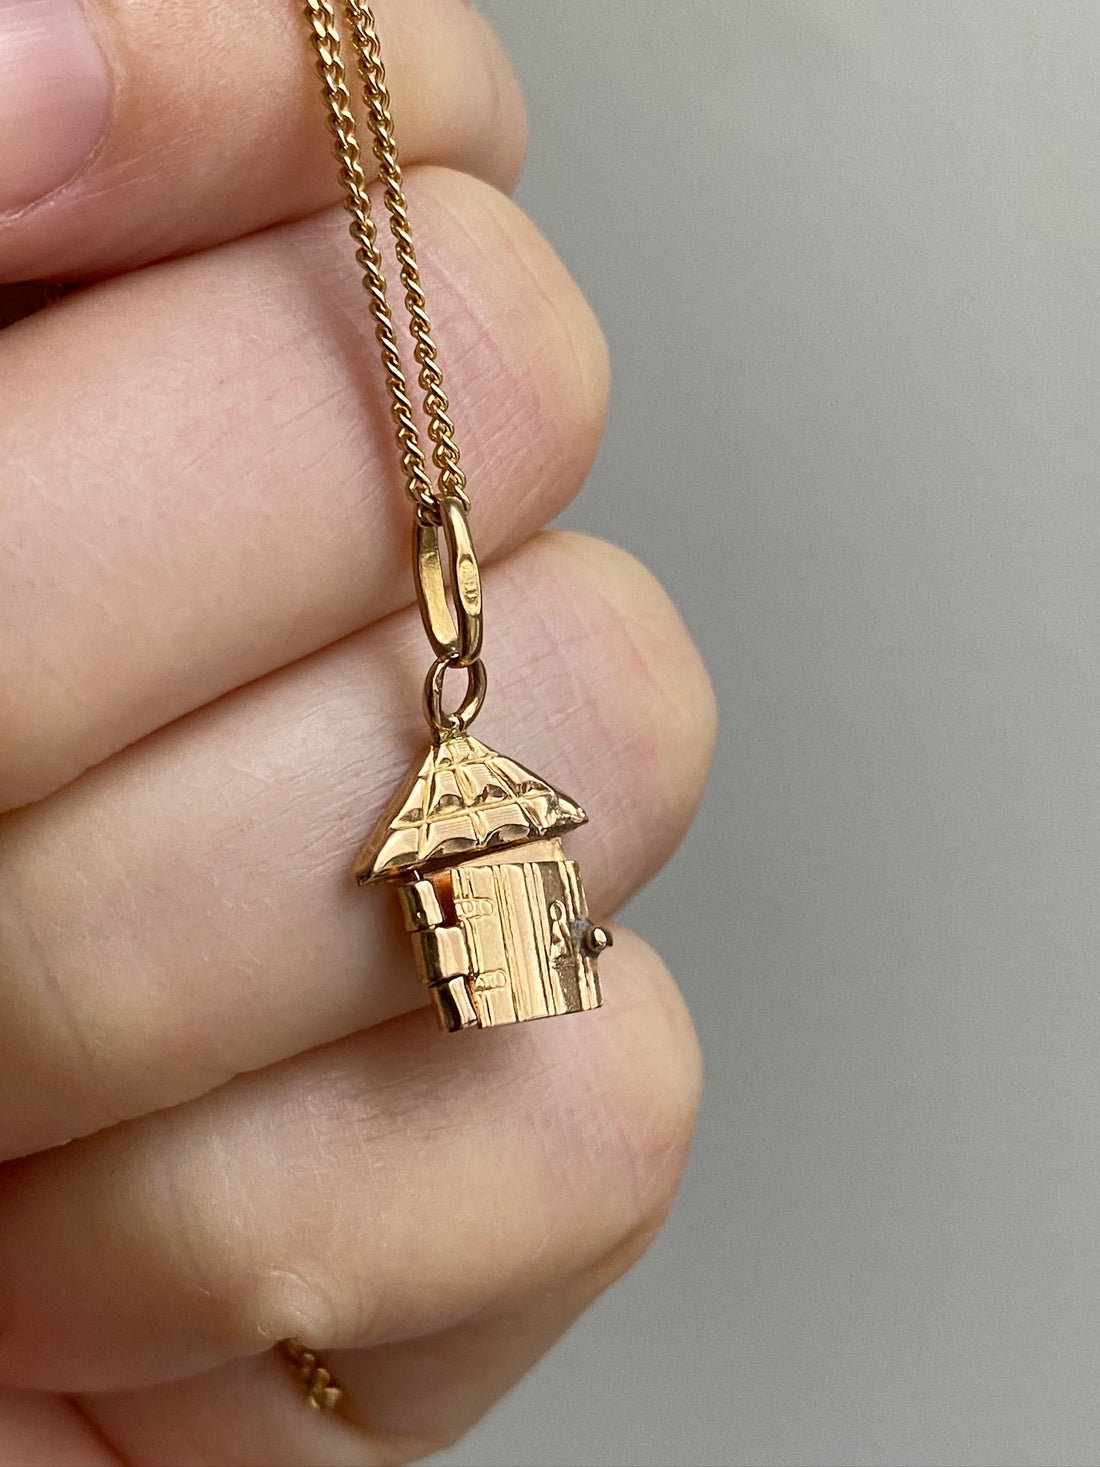 18k Gold Vintage Italian Charm or Pendant - Articulated house